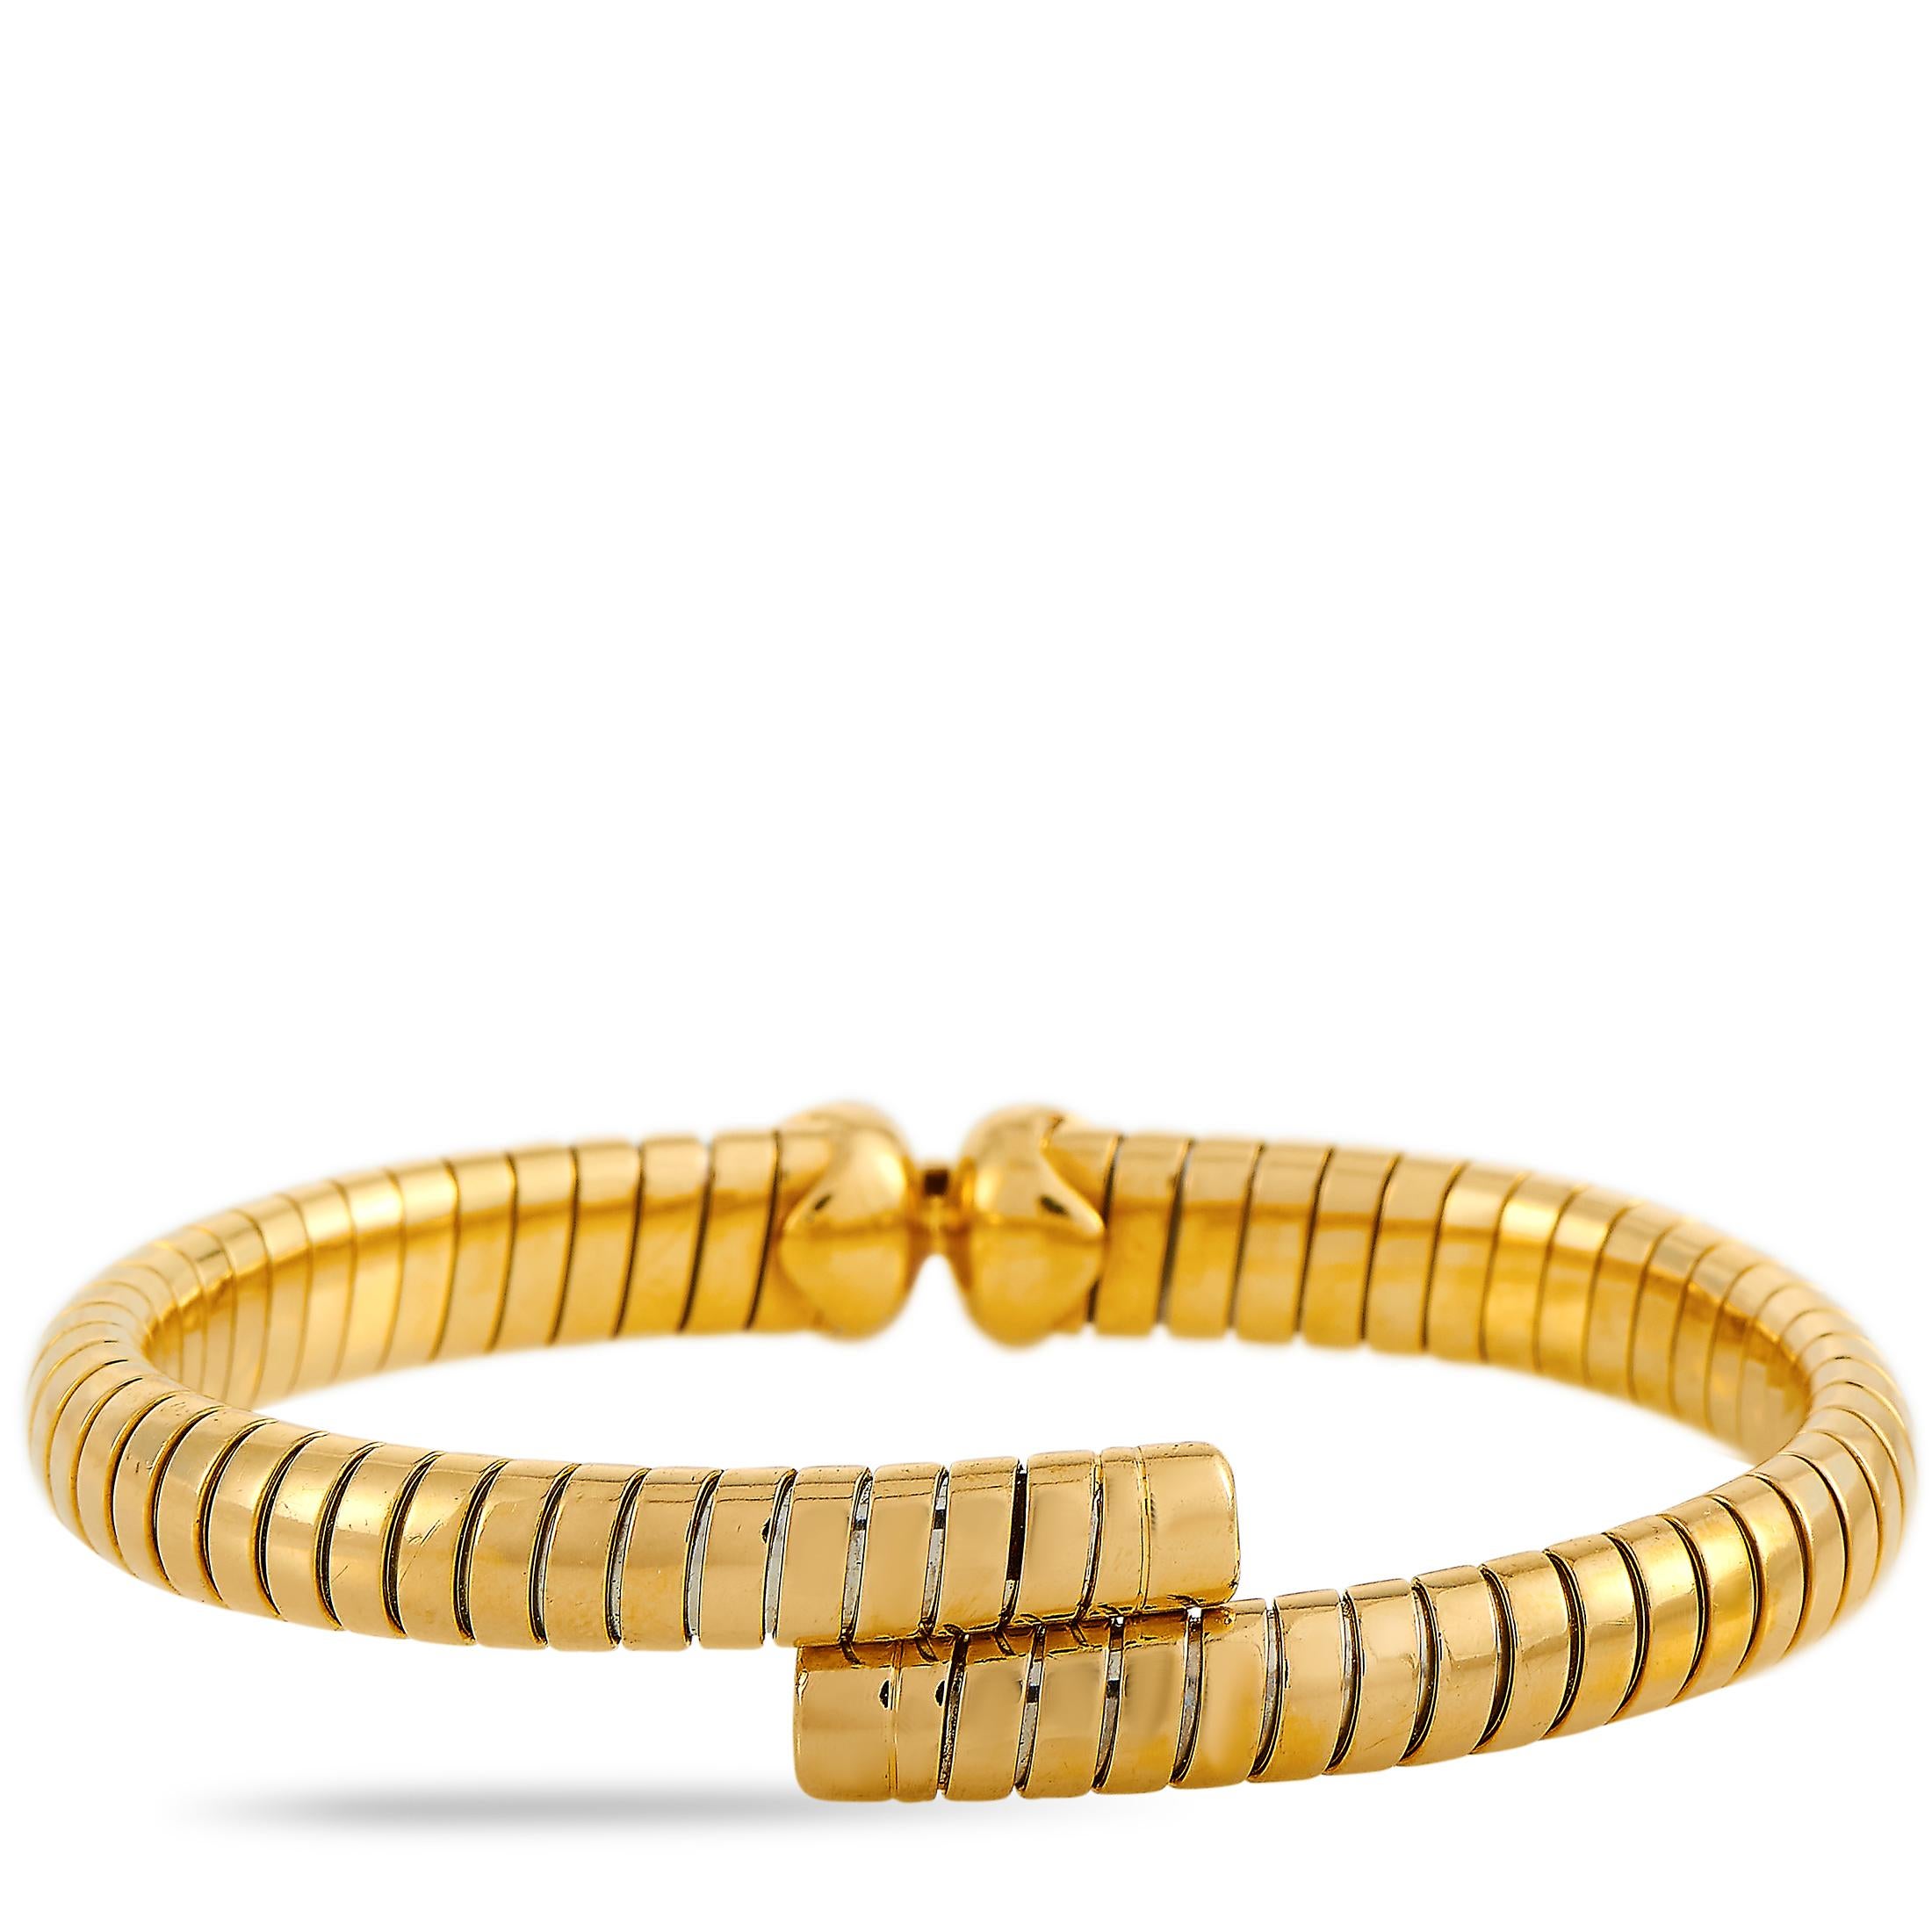 This Bvlgari tubogas bracelet is crafted from 18K yellow gold and weighs 31.1 grams. It measures 7.85” in length and boasts a 2.50” diameter.

The bracelet is offered in estate condition and includes the manufacturer’s box.